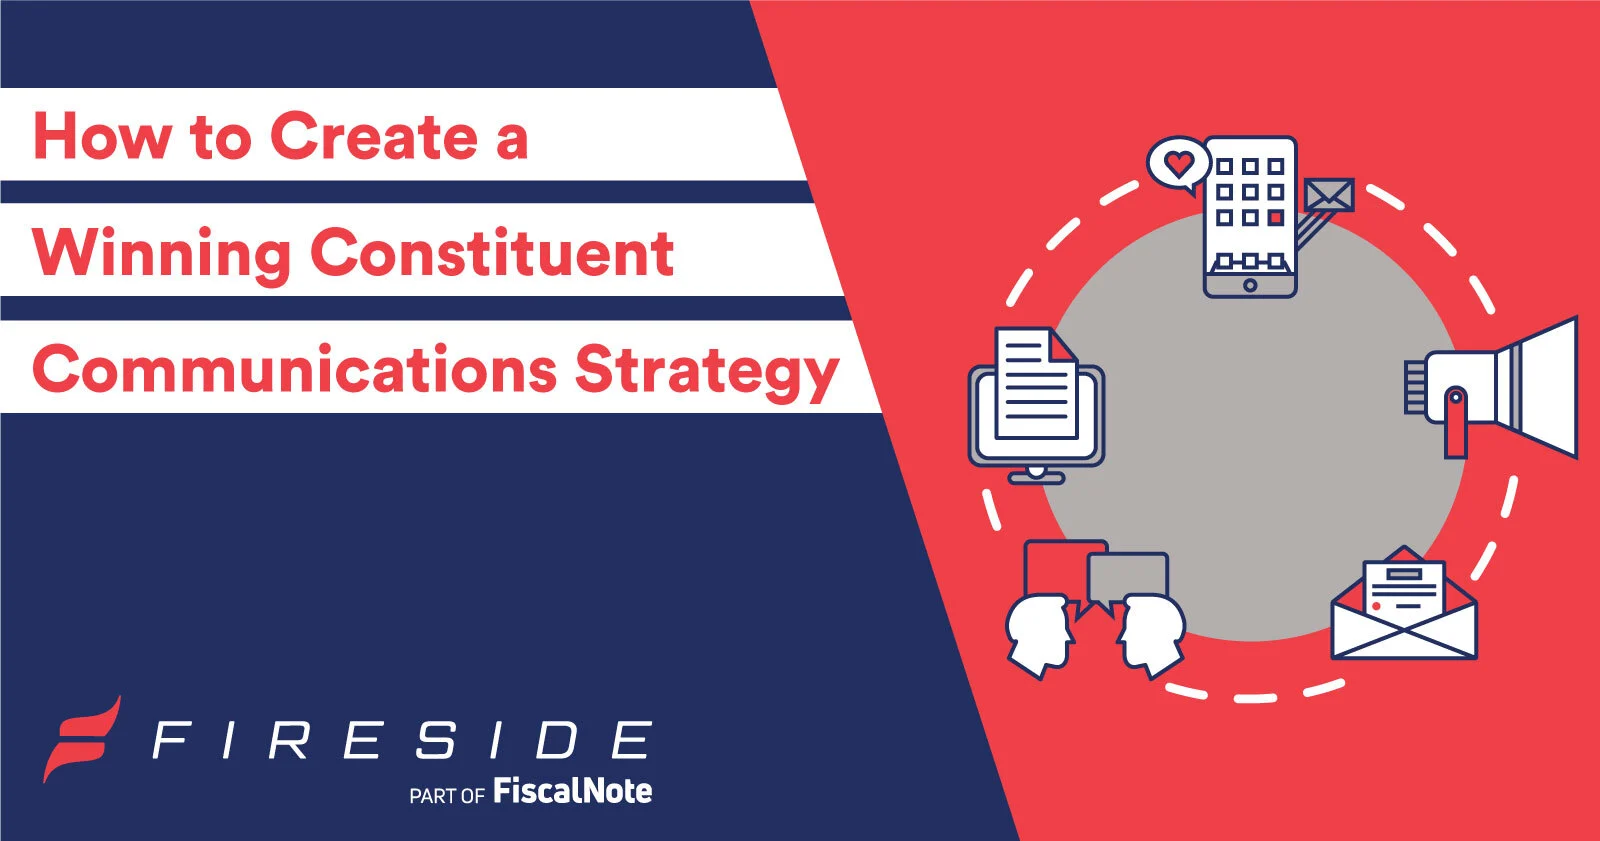 How to Create a Winning Constituent Communications Strategy